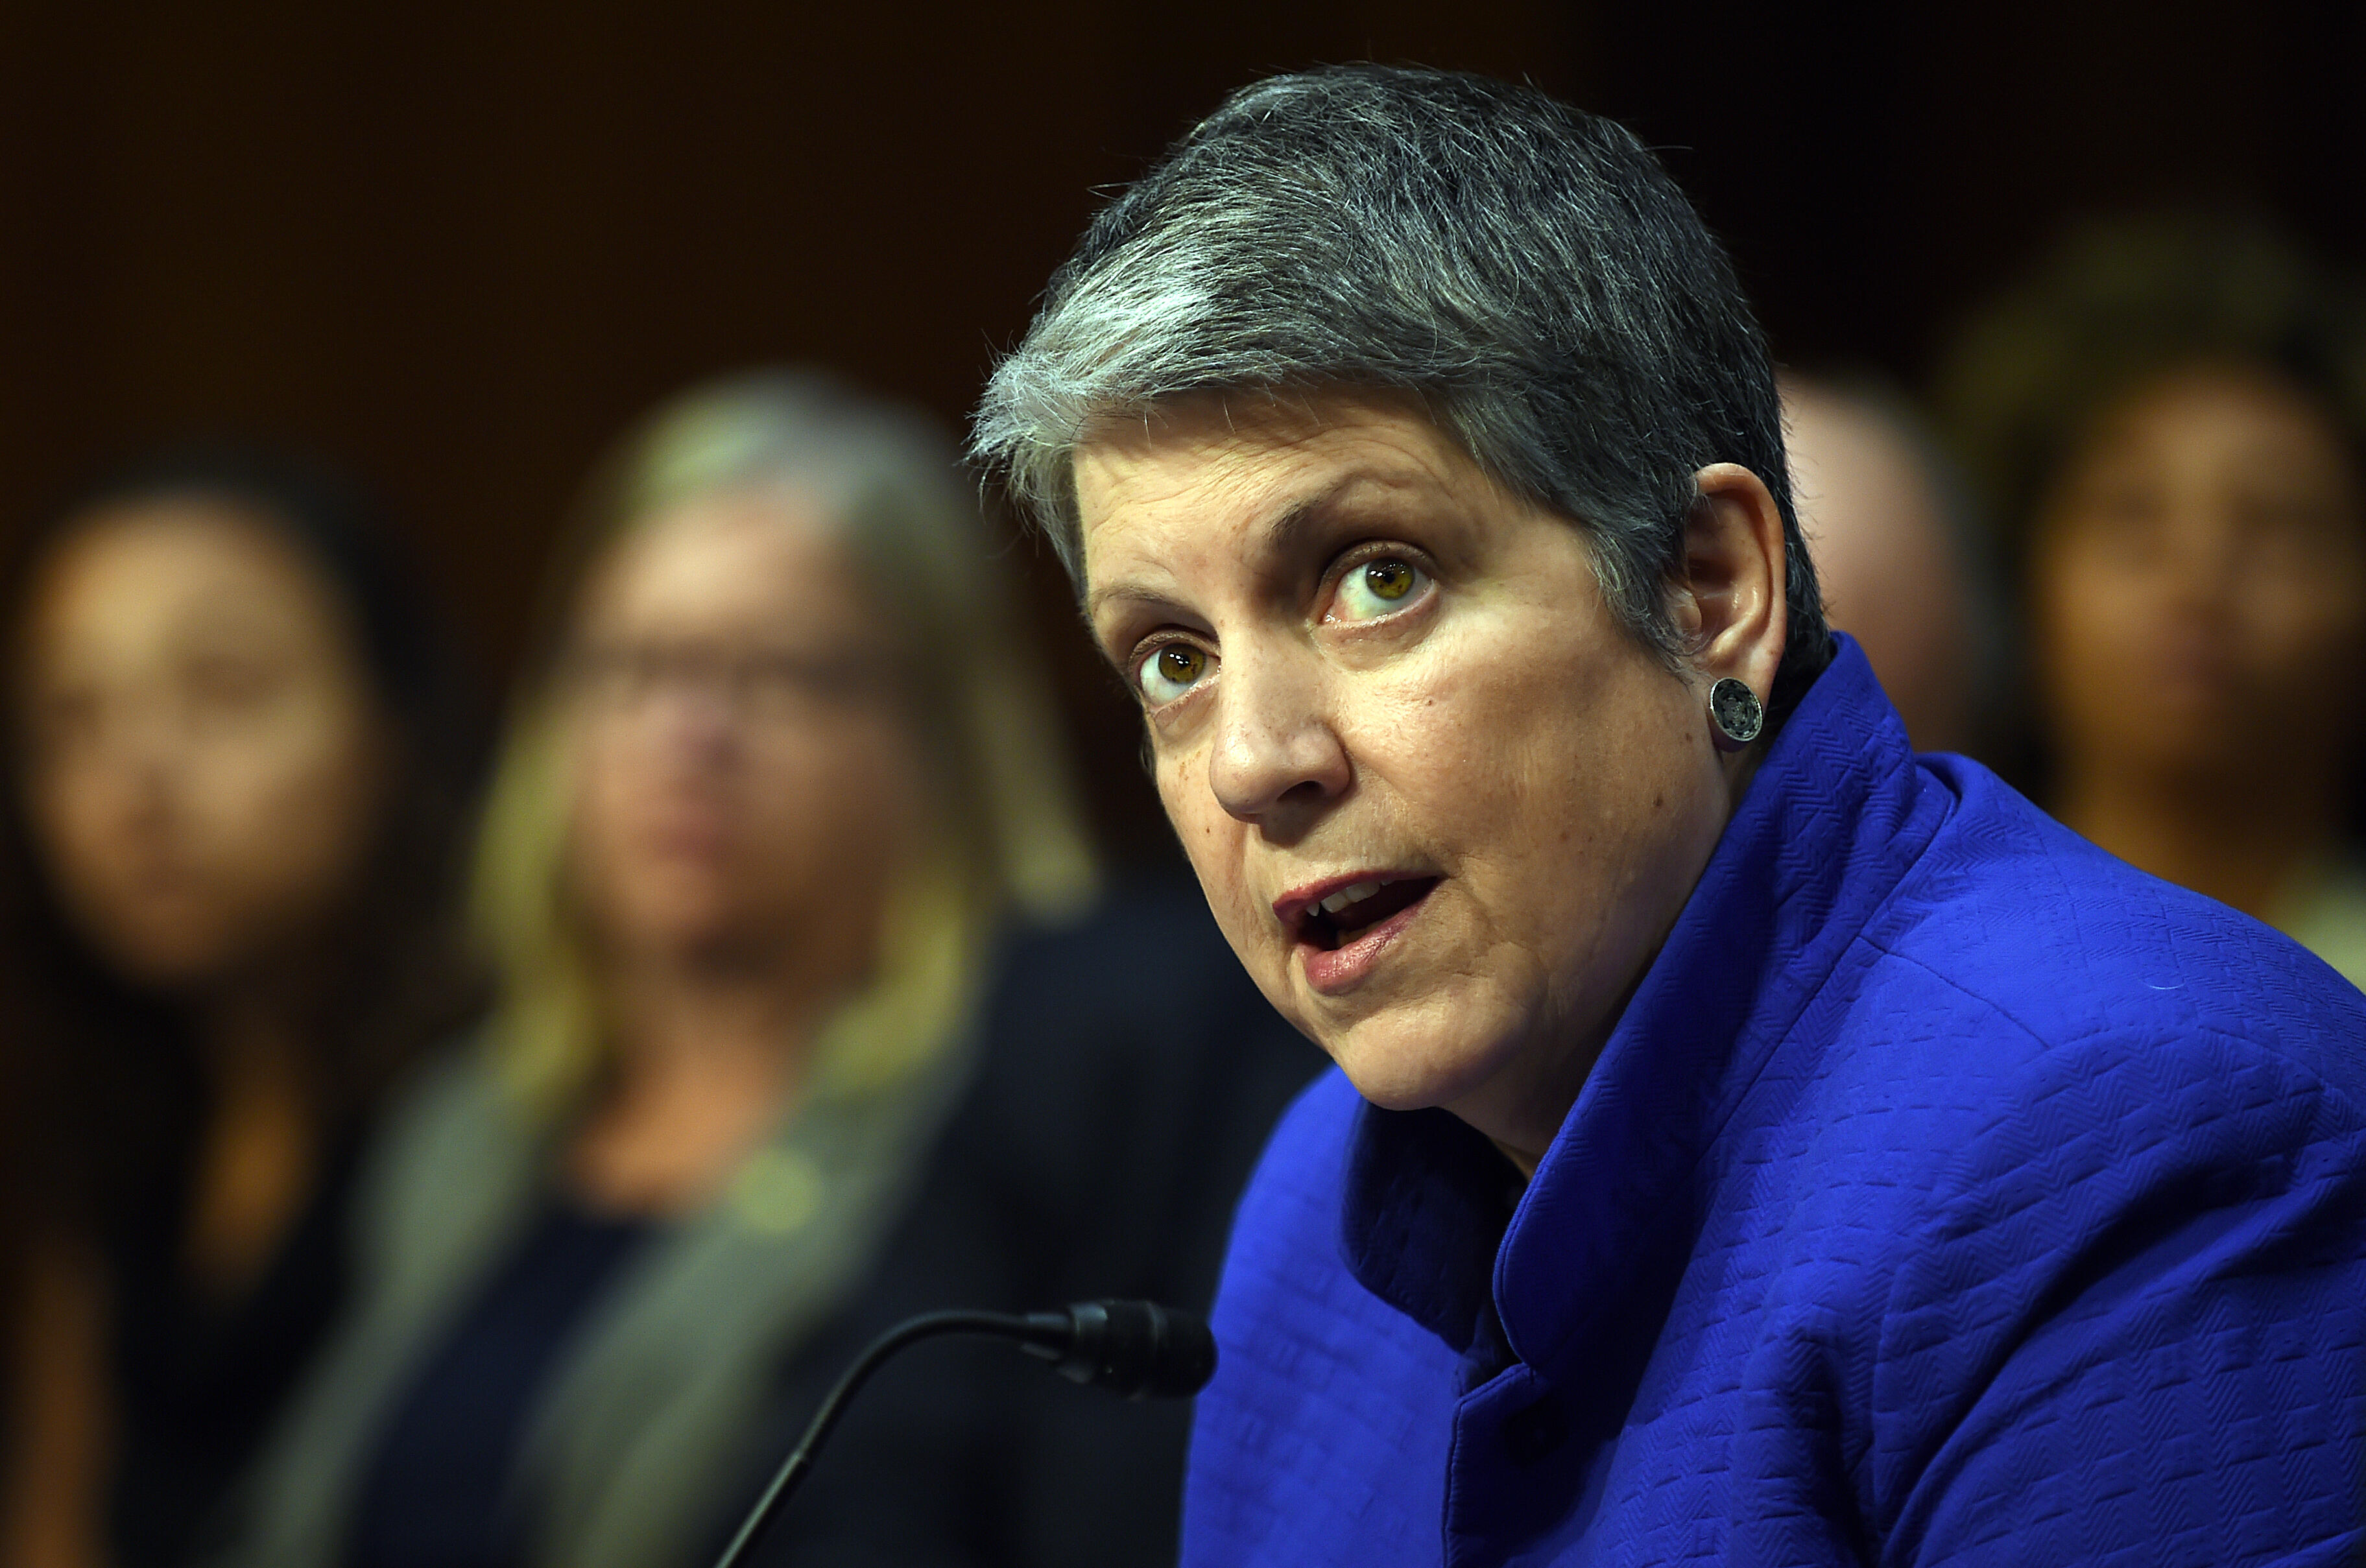 WASHINGTON, DC - JULY 29: Janet Napolitano, president of the University of California, speaks during a hearing of the Senate Health, Education, Labor, and Pensions Committee on July 29, 2015 in Washington, DC. The committee is examining the reauthorizatio